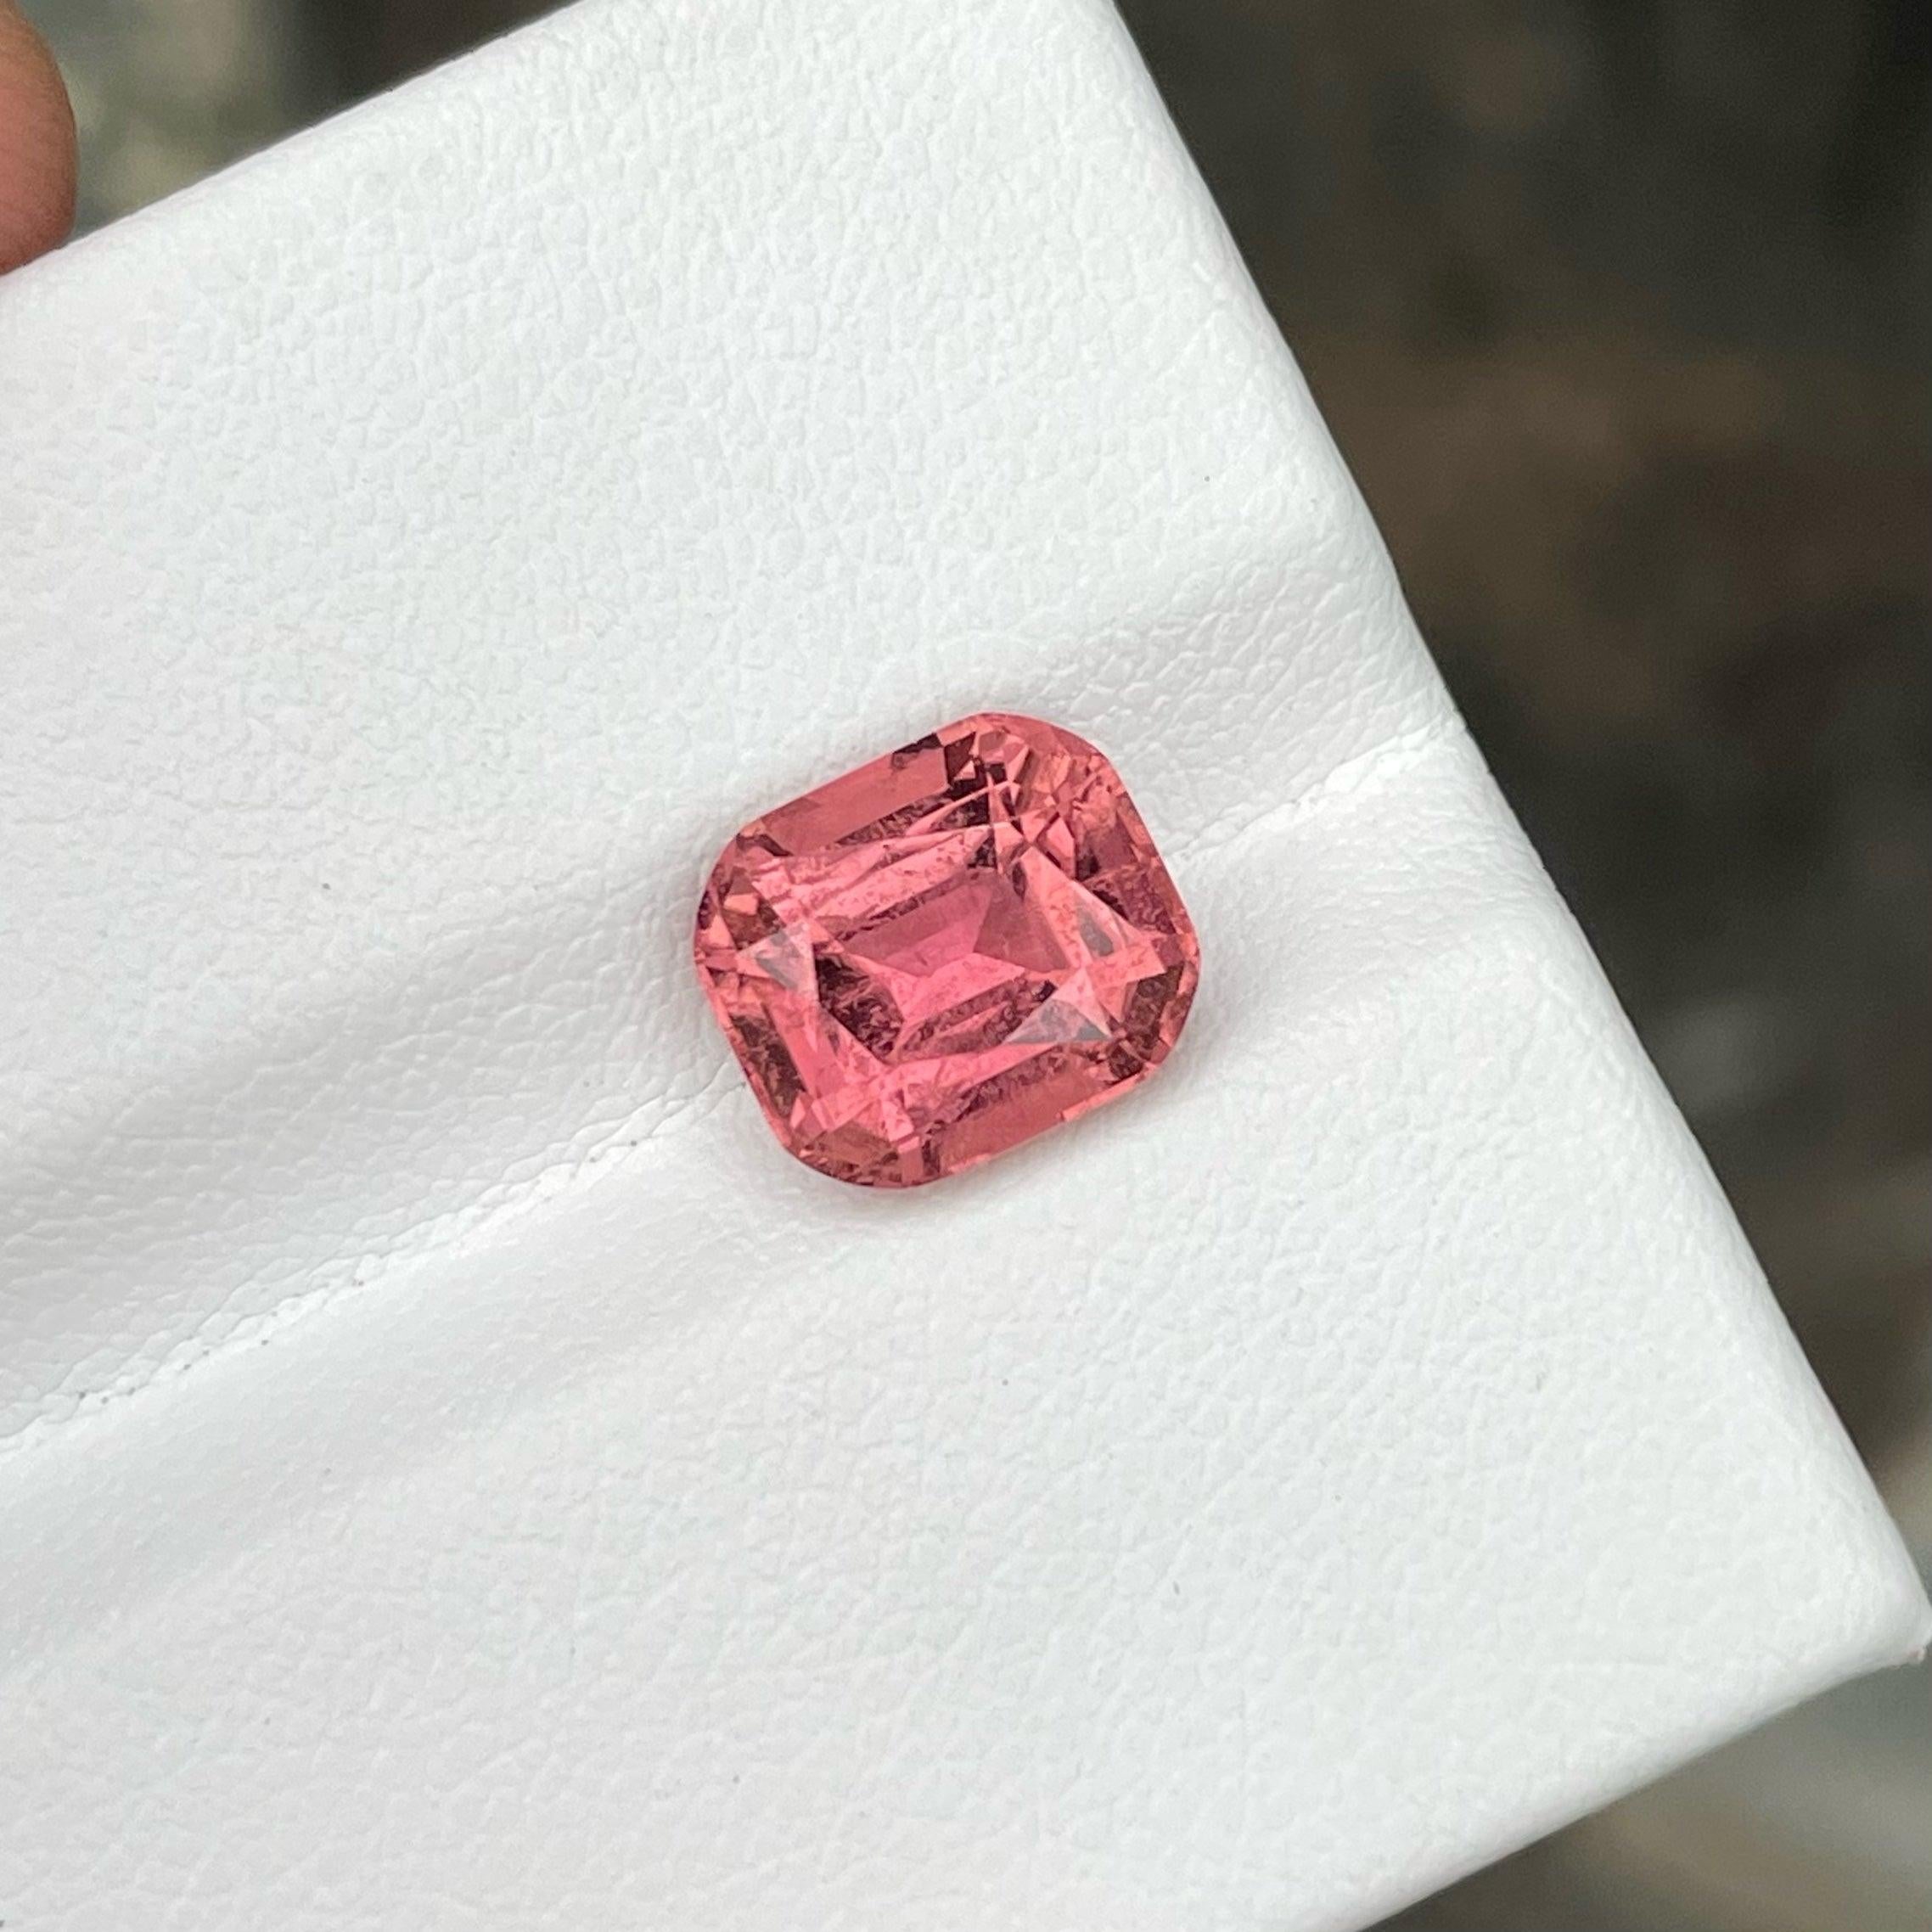 Natural Sweet Pink Tourmaline Stone, Available For Sale At Wholesale Price, Natural High-Quality, 3.41 Carats Loose Certified Pink Tourmaline Gemstone From Madagascar.

Product Information:
GEMSTONE TYPE	Natural Sweet Pink Tourmaline